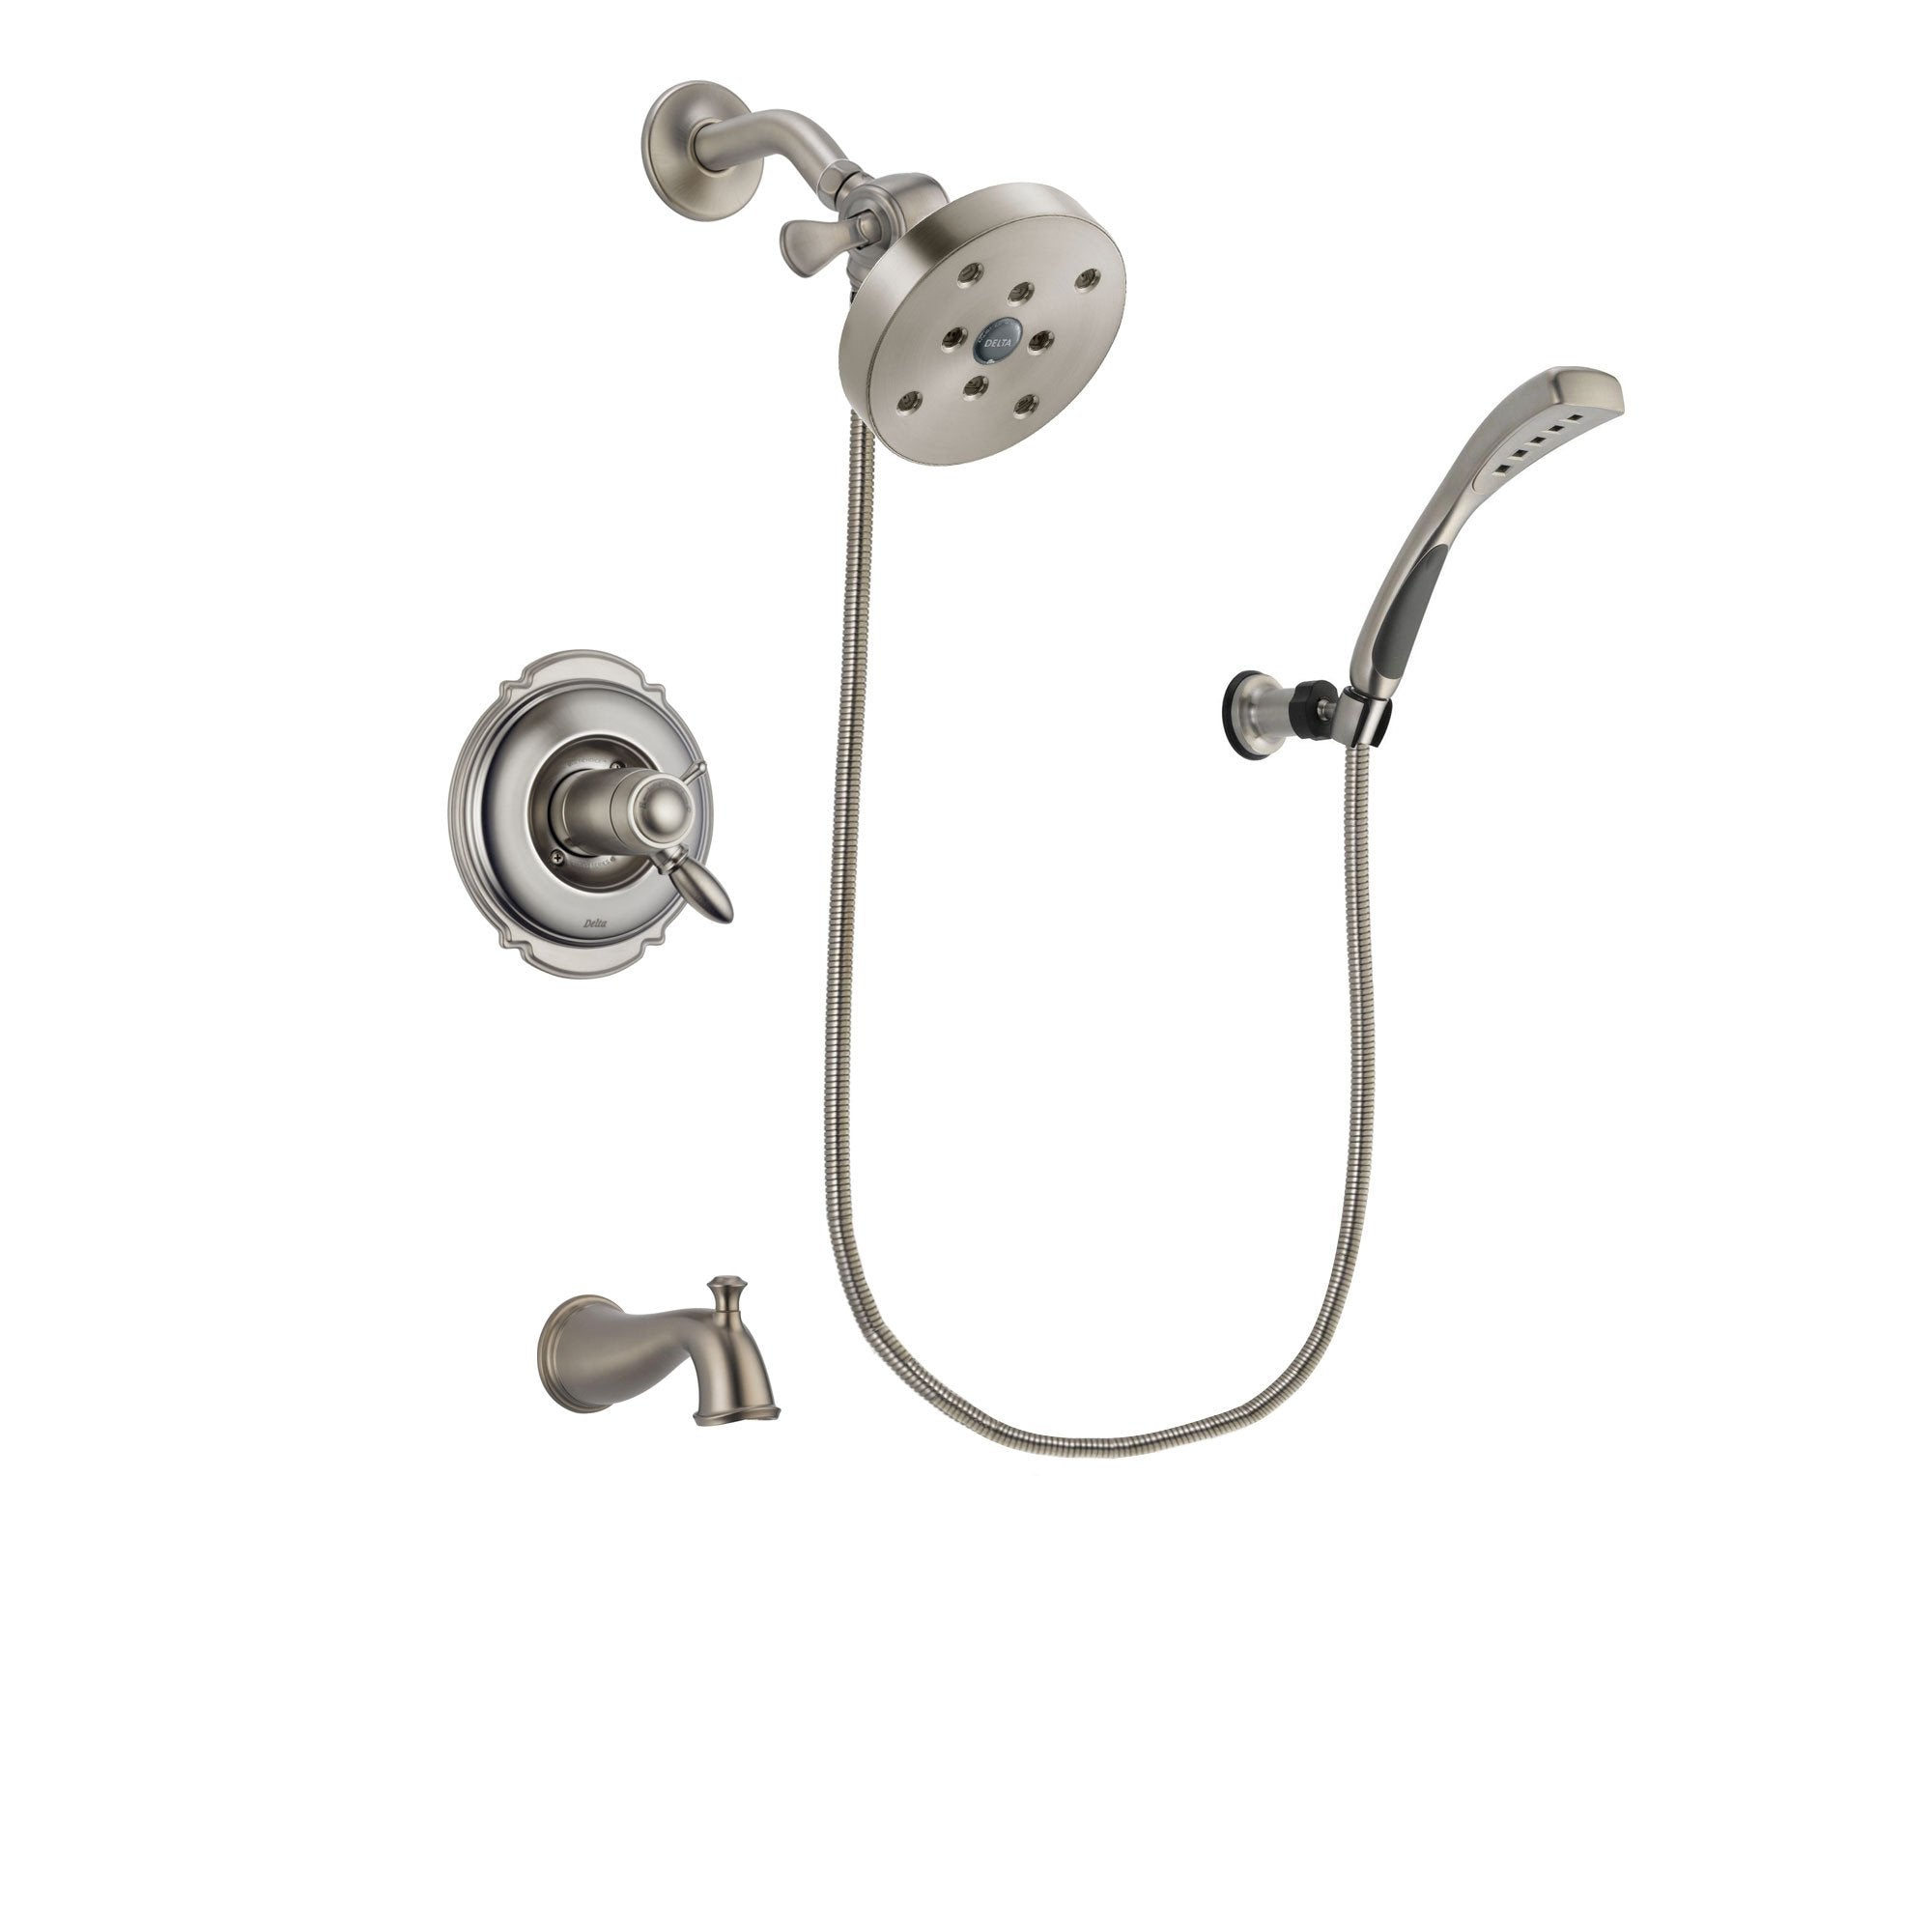 Delta Victorian Stainless Steel Finish Thermostatic Tub and Shower Faucet System Package with 5-1/2 inch Shower Head and Wall Mounted Handshower Includes Rough-in Valve and Tub Spout DSP1889V